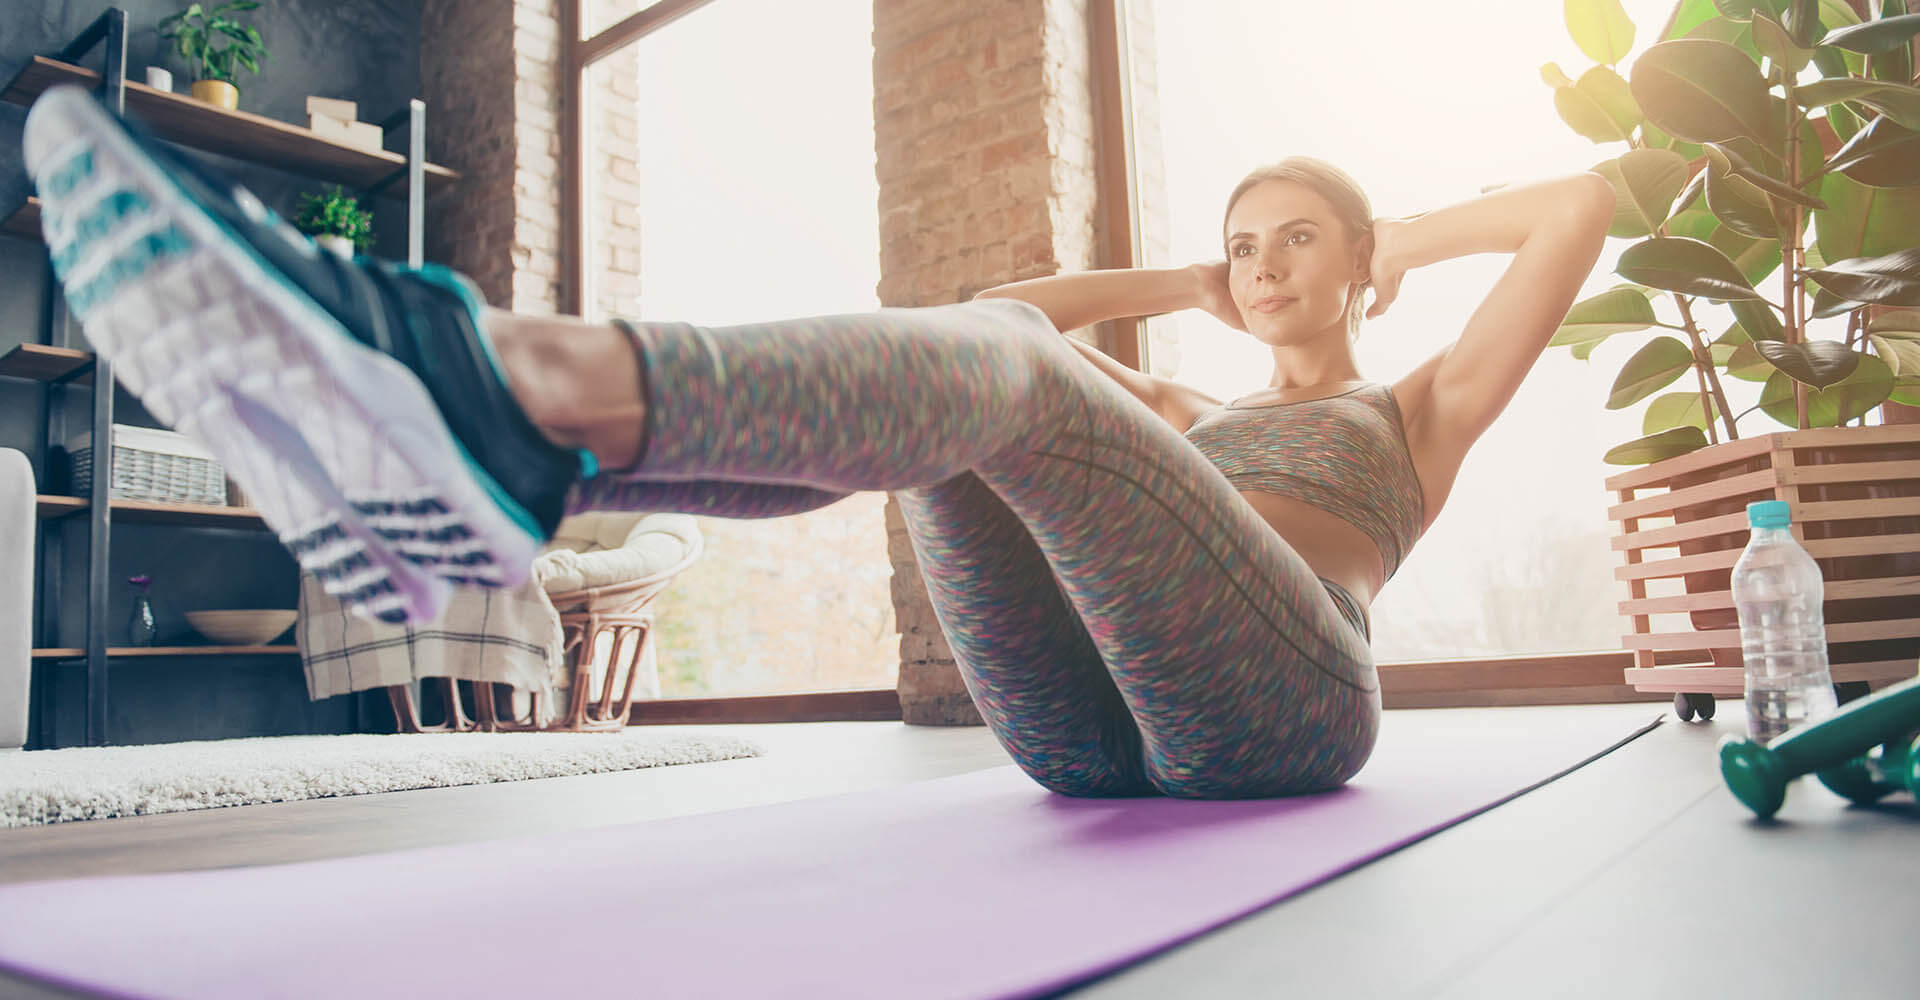 Woman doing sit-ups in living room on sleeping mat while listening to sports music